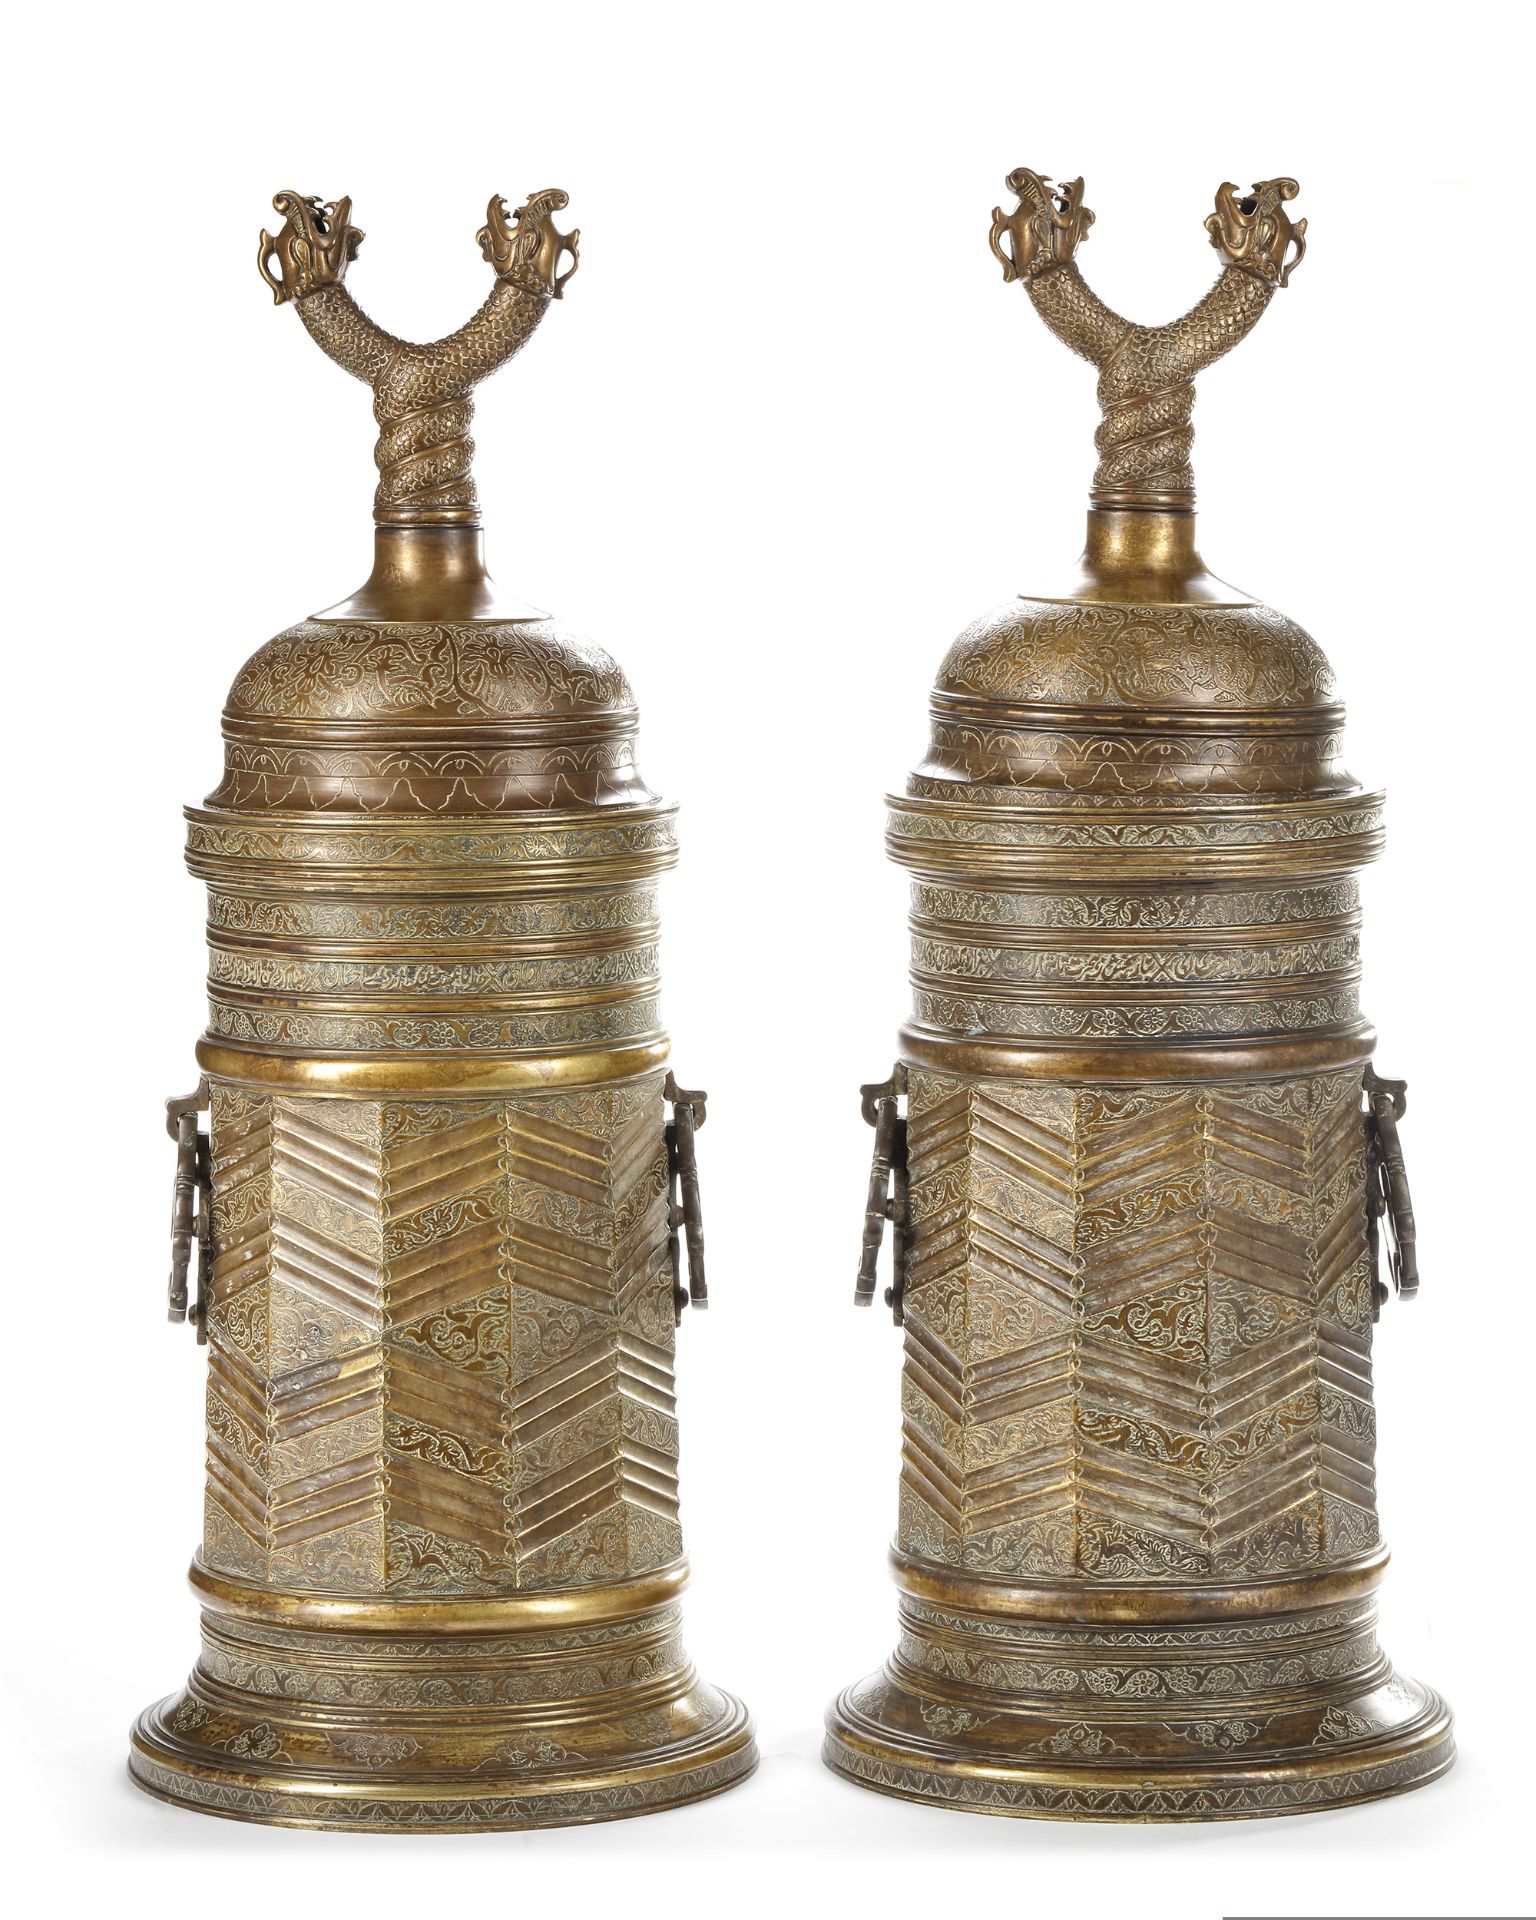 A PAIR OF LARGE SAFAVID STYLE ENGRAVED BRASS TORCH STANDS, PERSIA, 18TH-19TH CENTURY